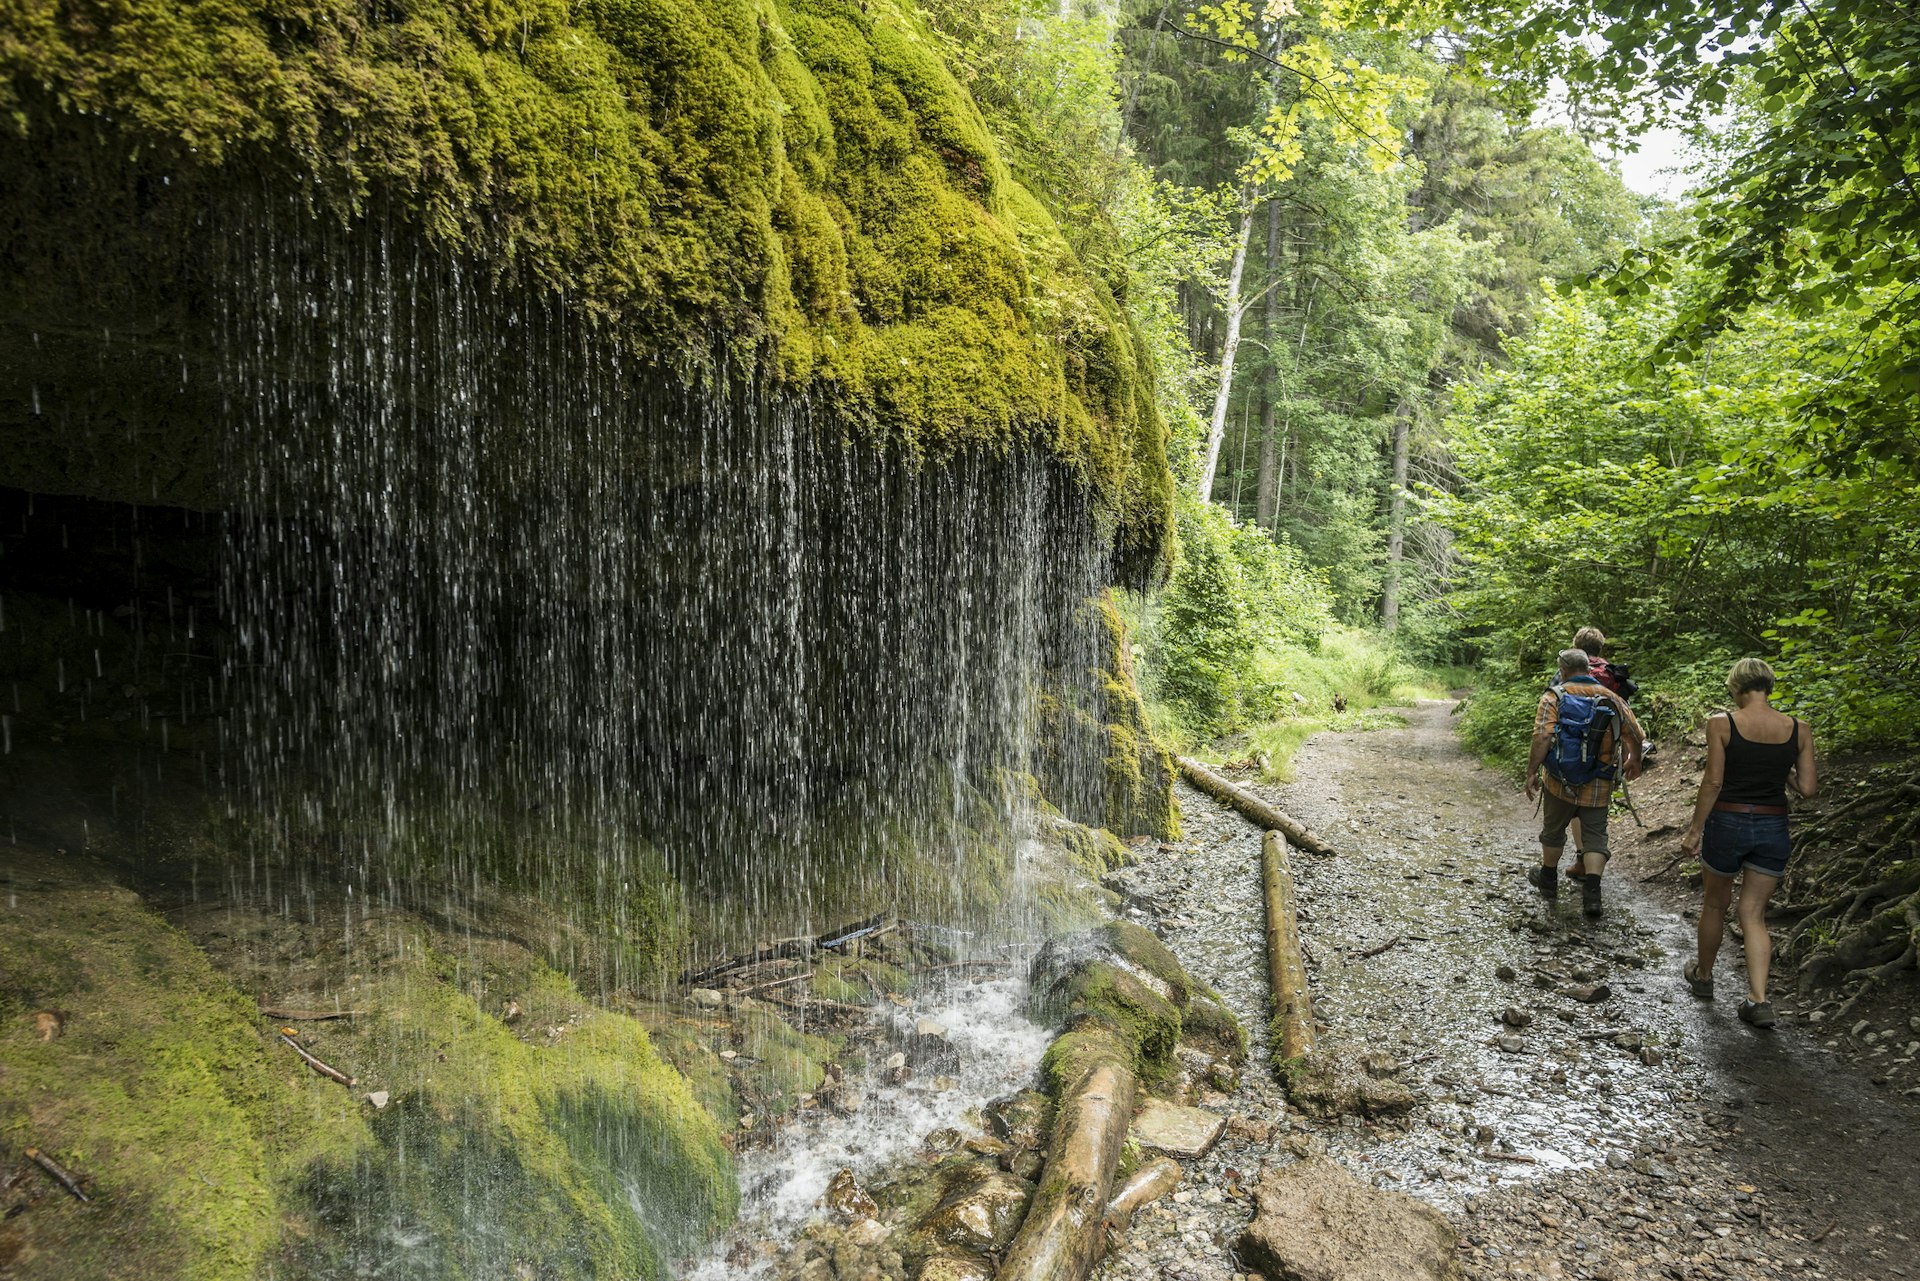 Three hikers make their way along a wooded path running through a gorge. Water cascades on their left